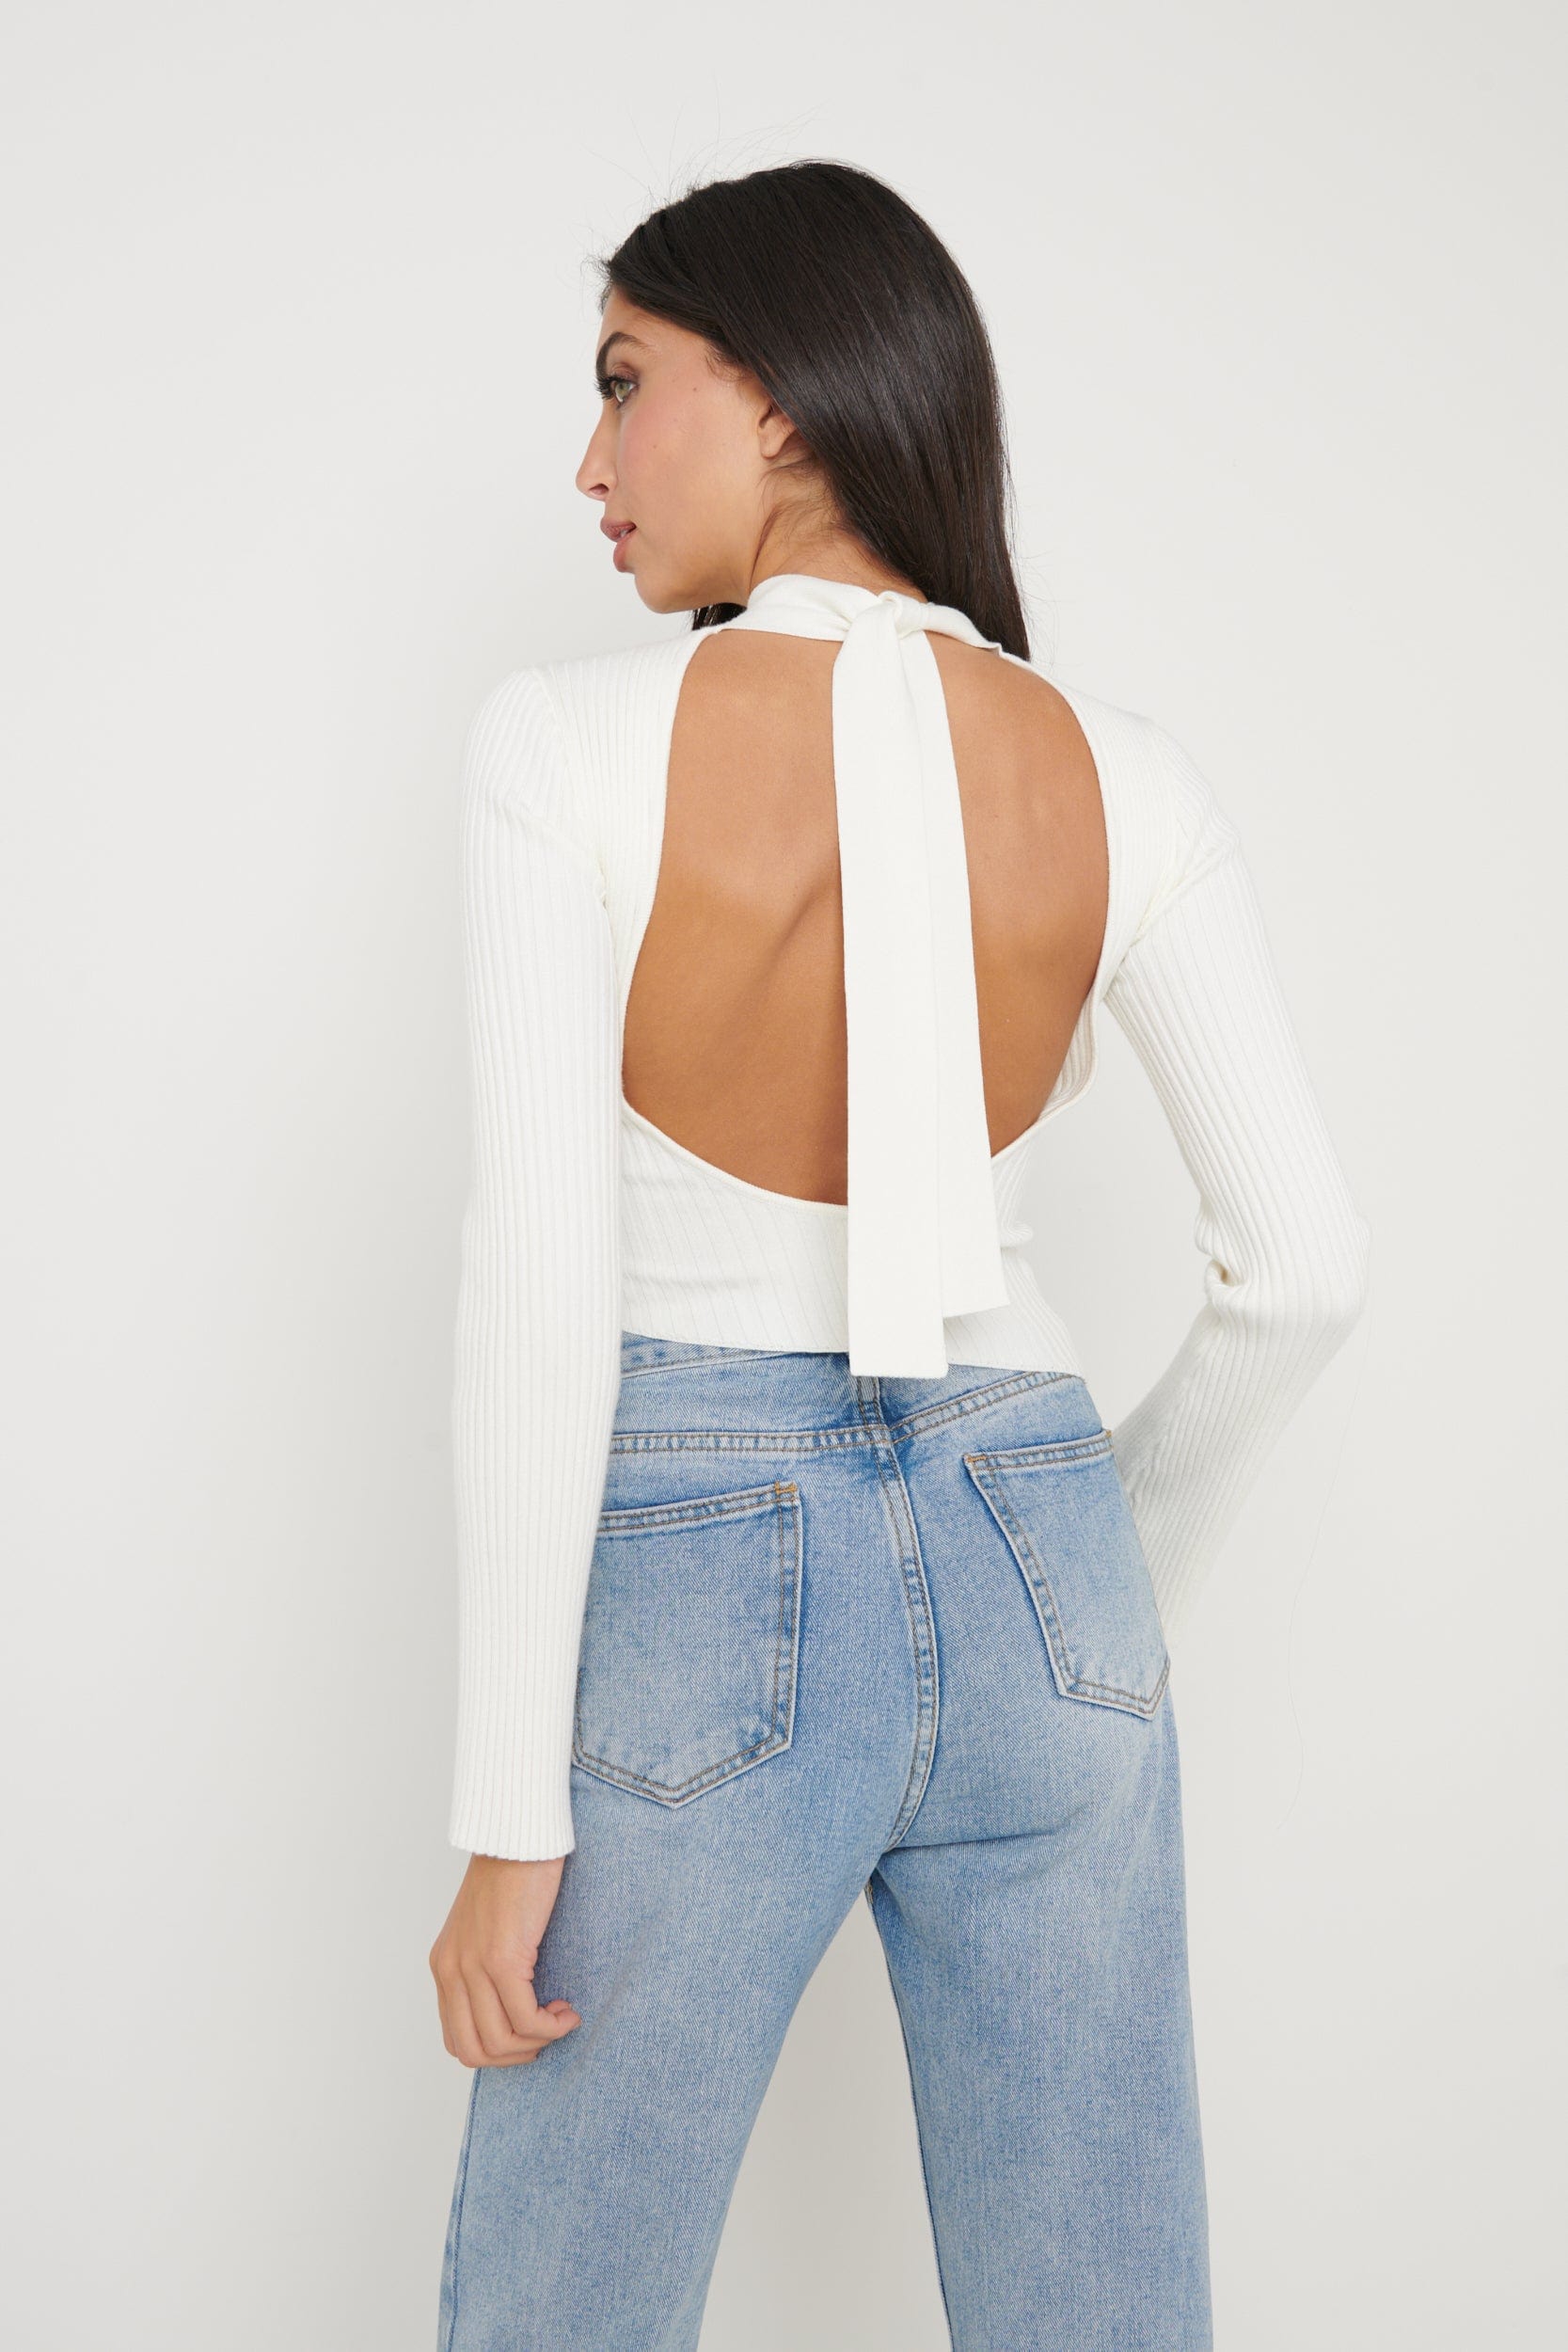 Lakelyn Backless High Neck Knit Top - Cream, M